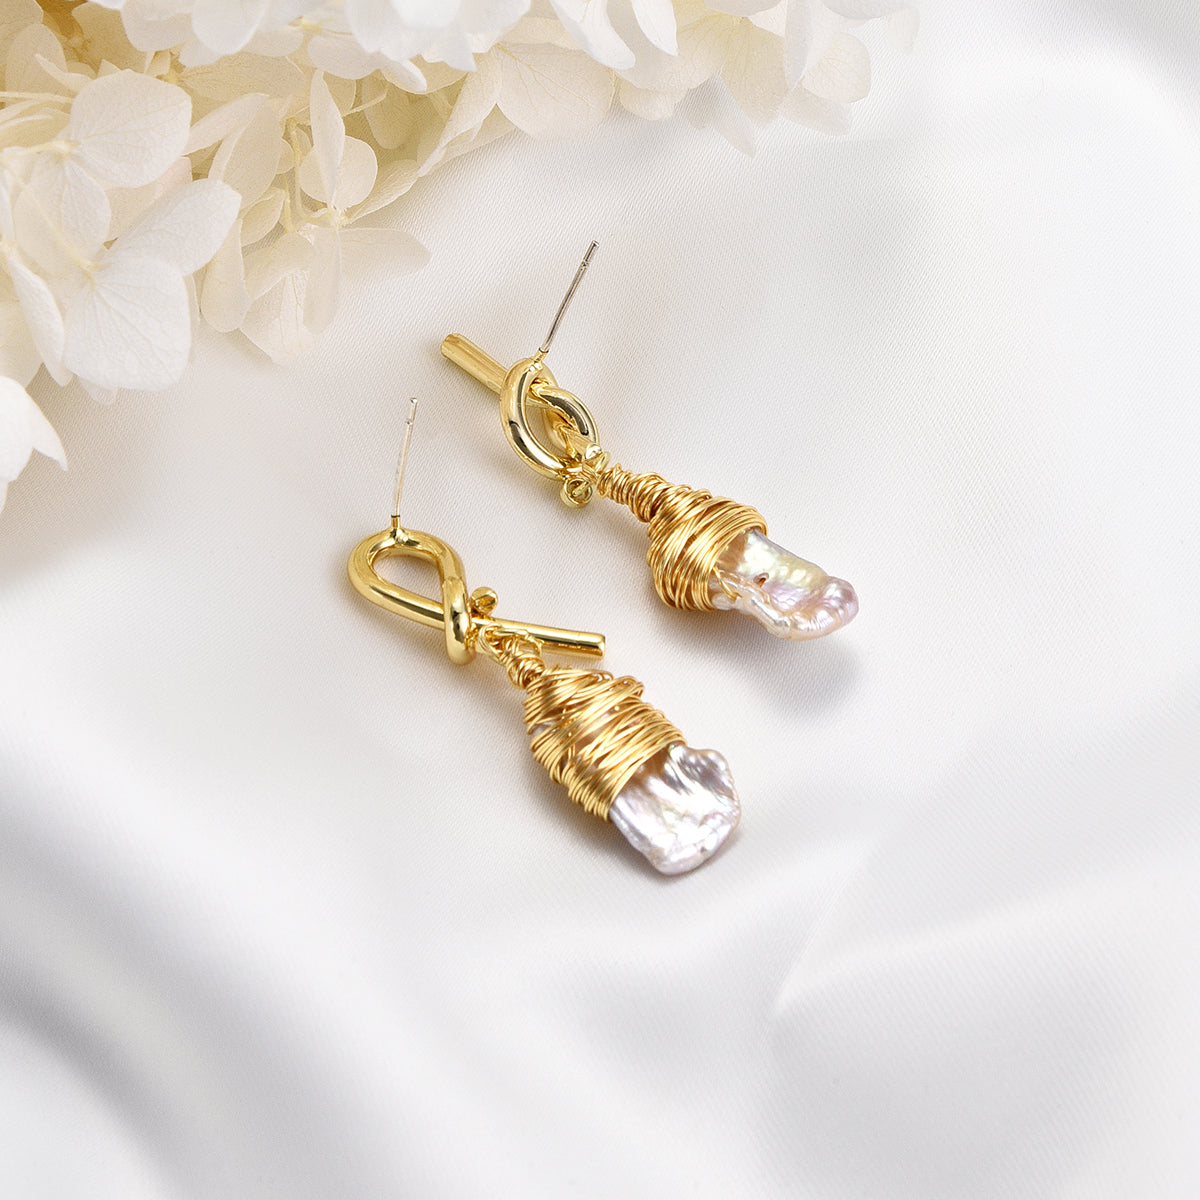 Artzy white and gold set of earrings